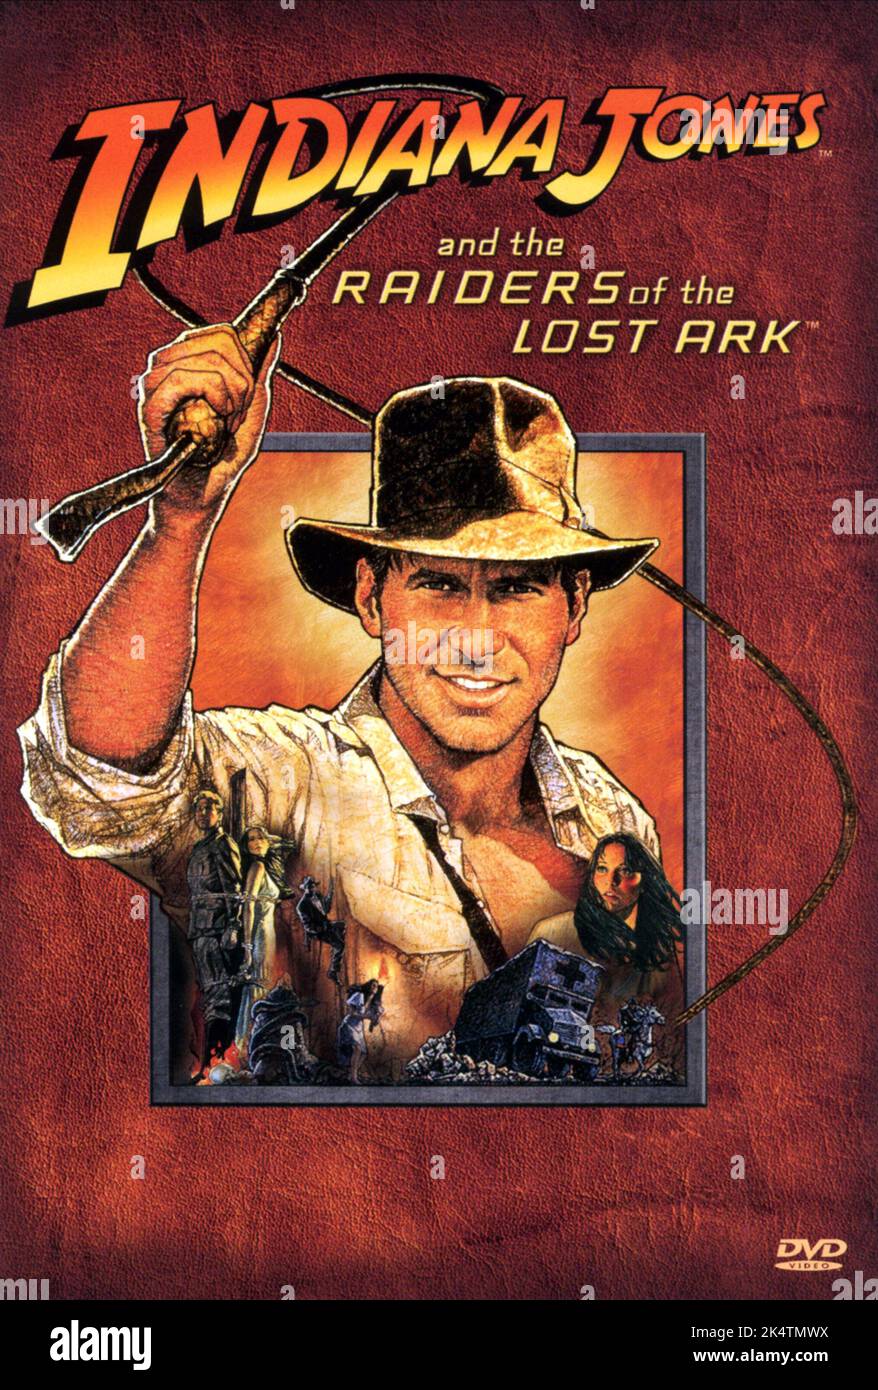 Raiders Of The Lost Ark 1981.  Raiders Of The Lost Ark  Movie Poster.  Indiana Jones And The Raiders Of The Lost Ark  Harrison Ford Stock Photo